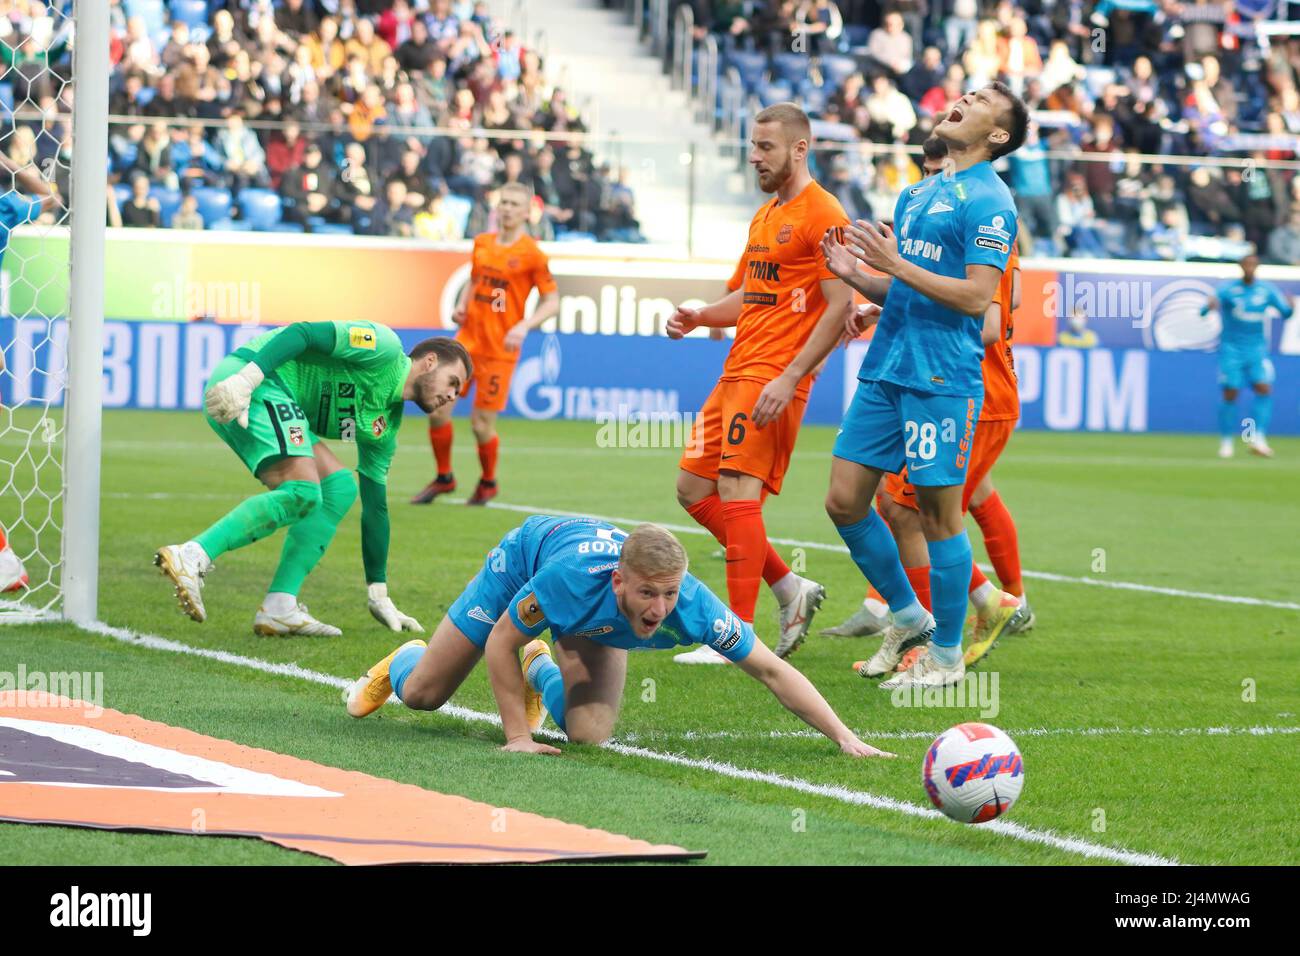 Saint Petersburg, Russia. 16th Apr, 2022. Nyraly Alip (No.28), Dmitri Chistyakov (No.2) of Zenit, Ilya Pomazun (No.1) of Ural celebrate a goal during the Russian Premier League football match between Zenit Saint Petersburg and Ural Yekaterinburg at Gazprom Arena. Final score; Zenit 3:1 Ural. Credit: SOPA Images Limited/Alamy Live News Stock Photo